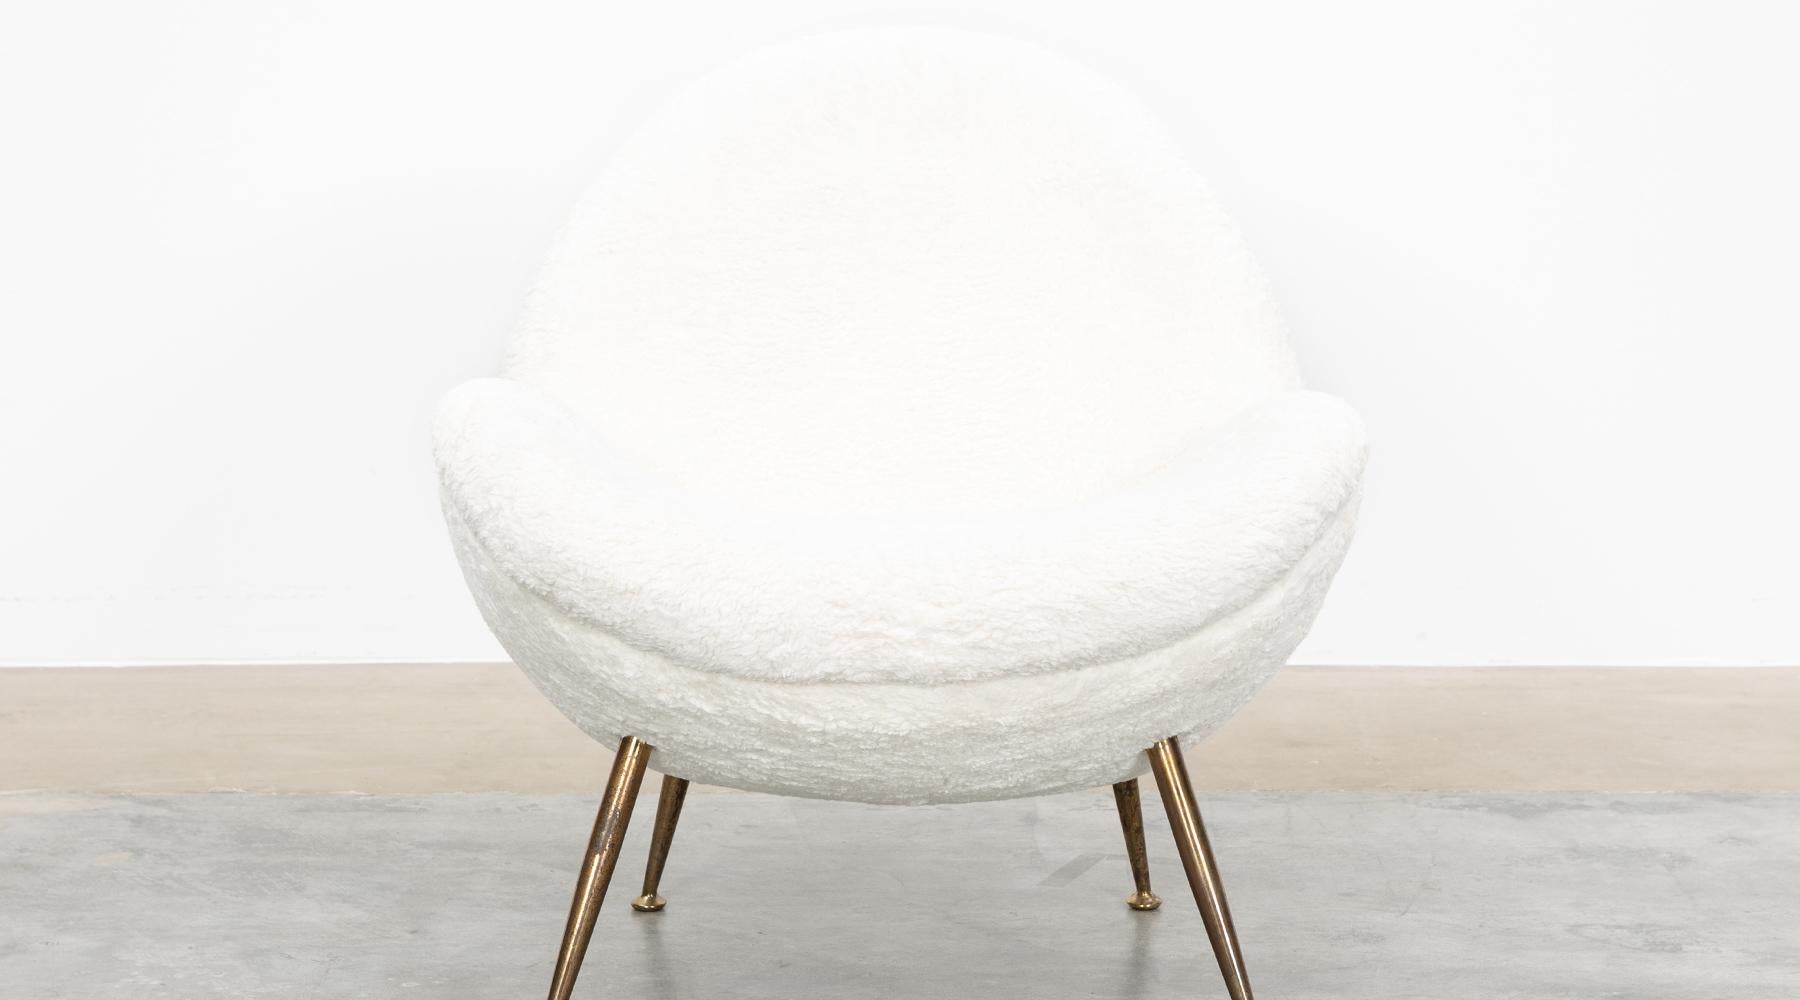 1950s White Faux Fur on Brass Legs Single Lounge Chair by Fritz Neth In Excellent Condition For Sale In Frankfurt, Hessen, DE